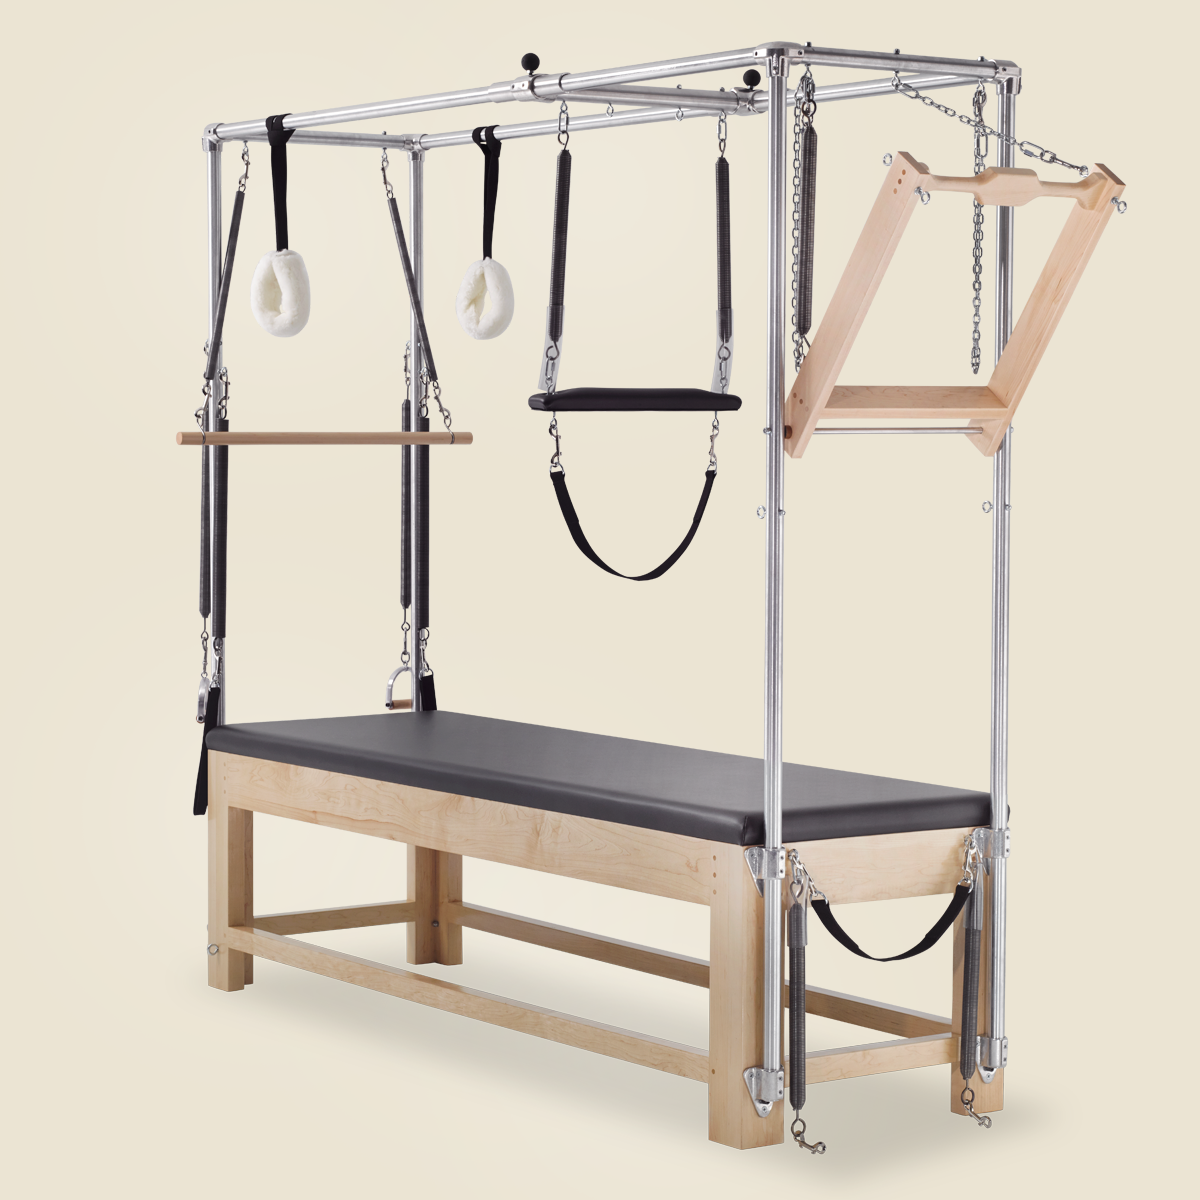 View All Our Products - Gratz™ Pilates